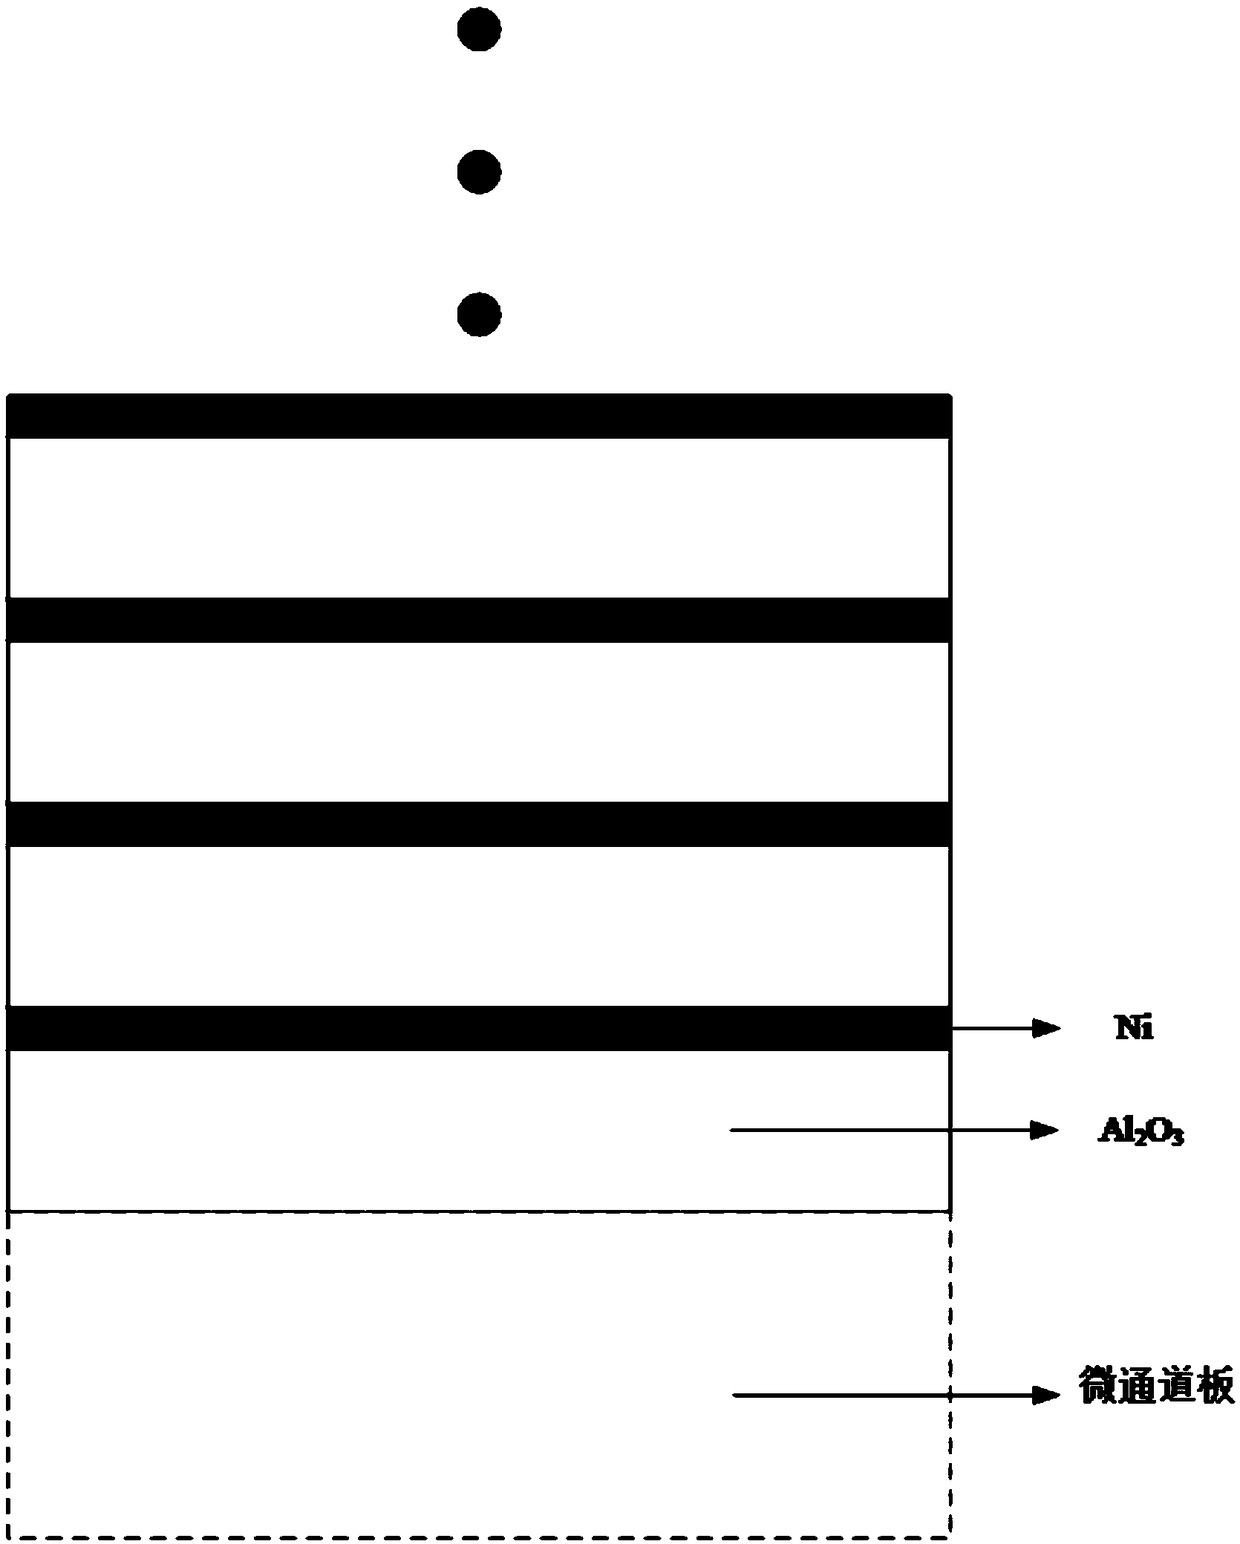 Micro-channel plate and method for preparing Ni-doped Al2O3 high-resistance film on inner wall of micro-channel plate